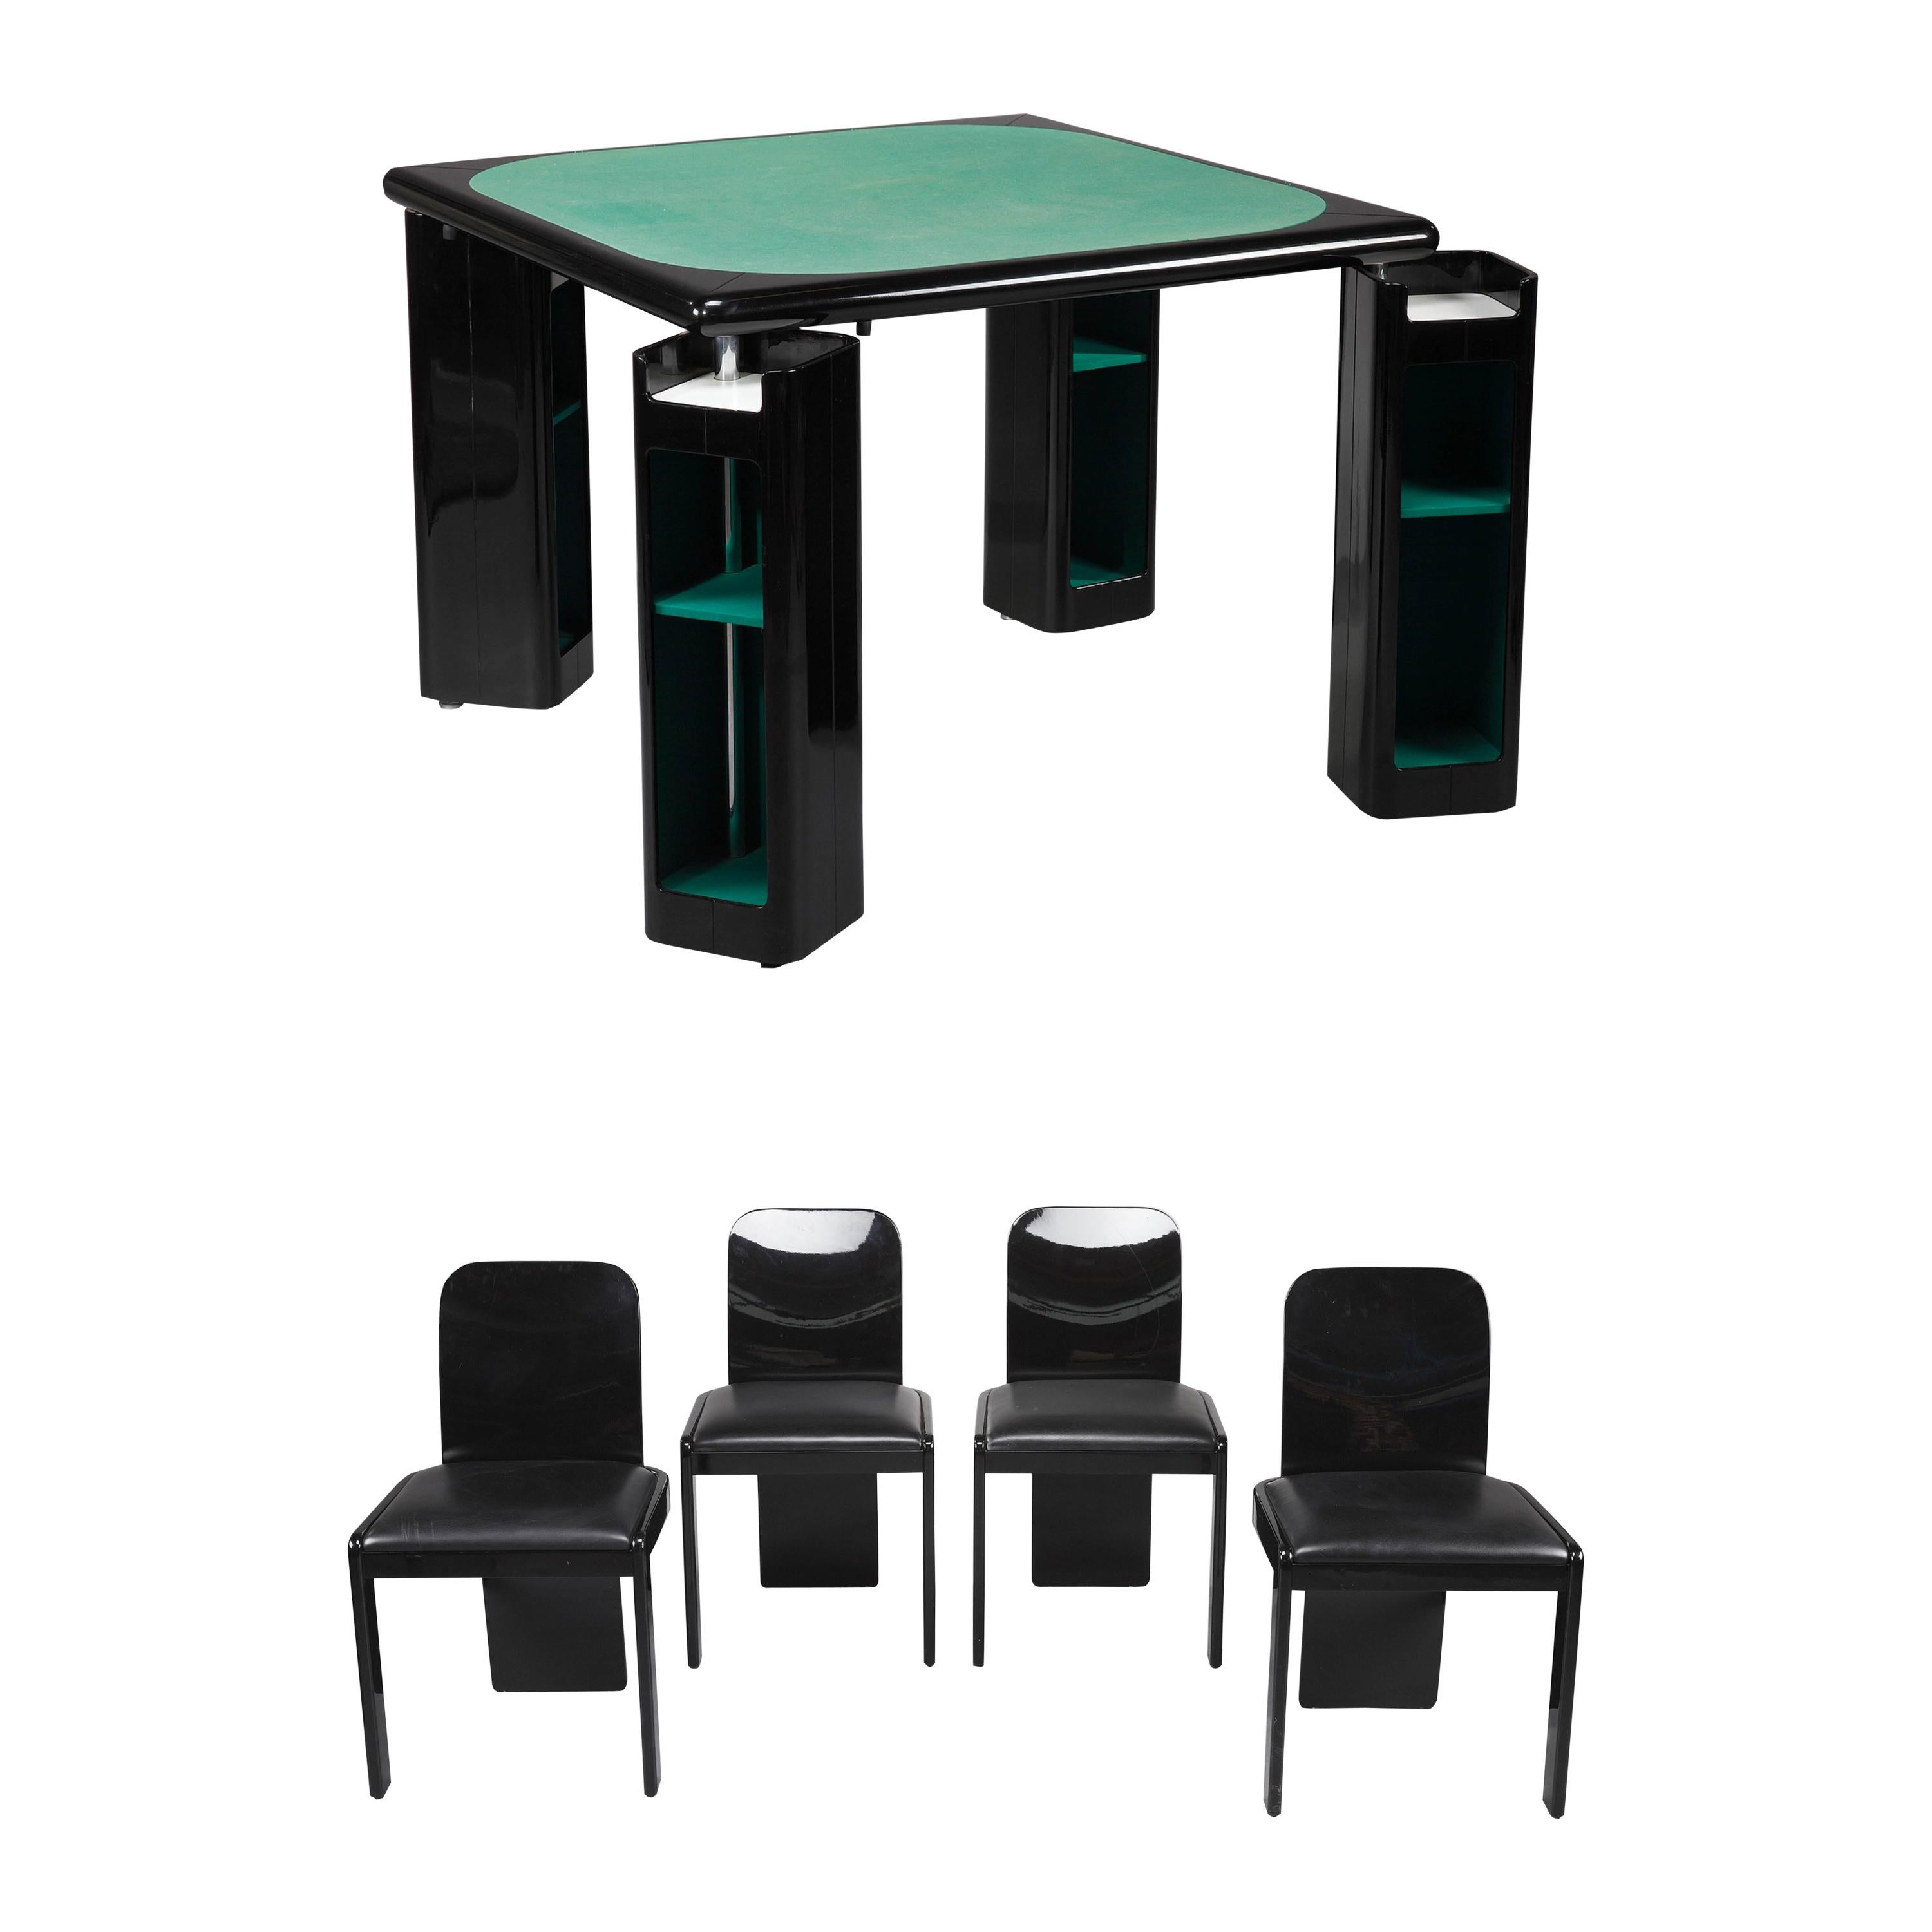 1970s Italian Game Table and Chairs by Pierluigi Molinari for Pozzi